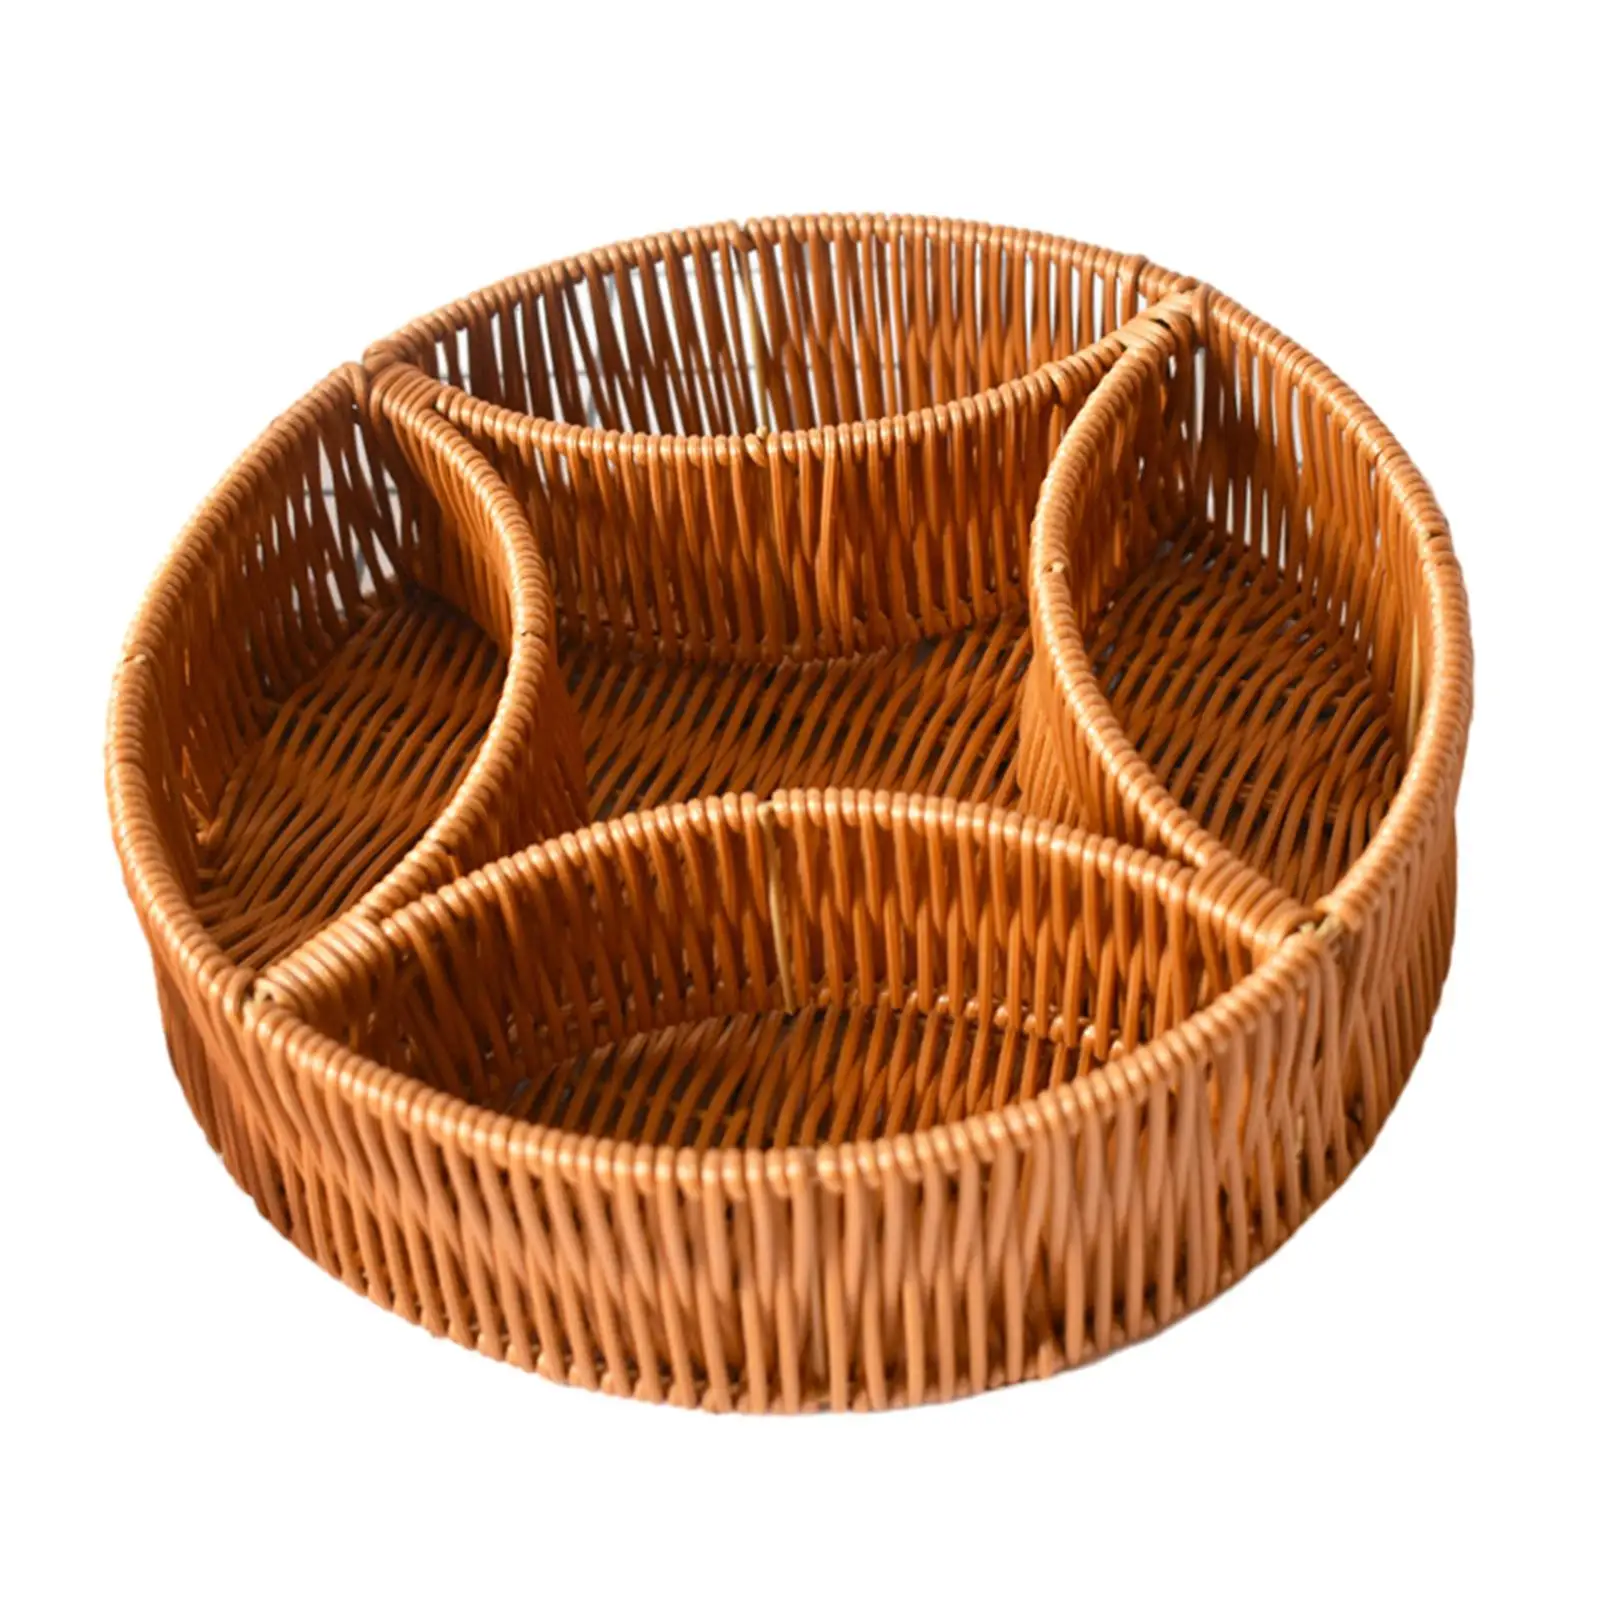 Hand Woven Serving Basket Dividers Rustic Food Storage Tray Handmade Décor for Restaurant Dining Wedding Gift Pantry